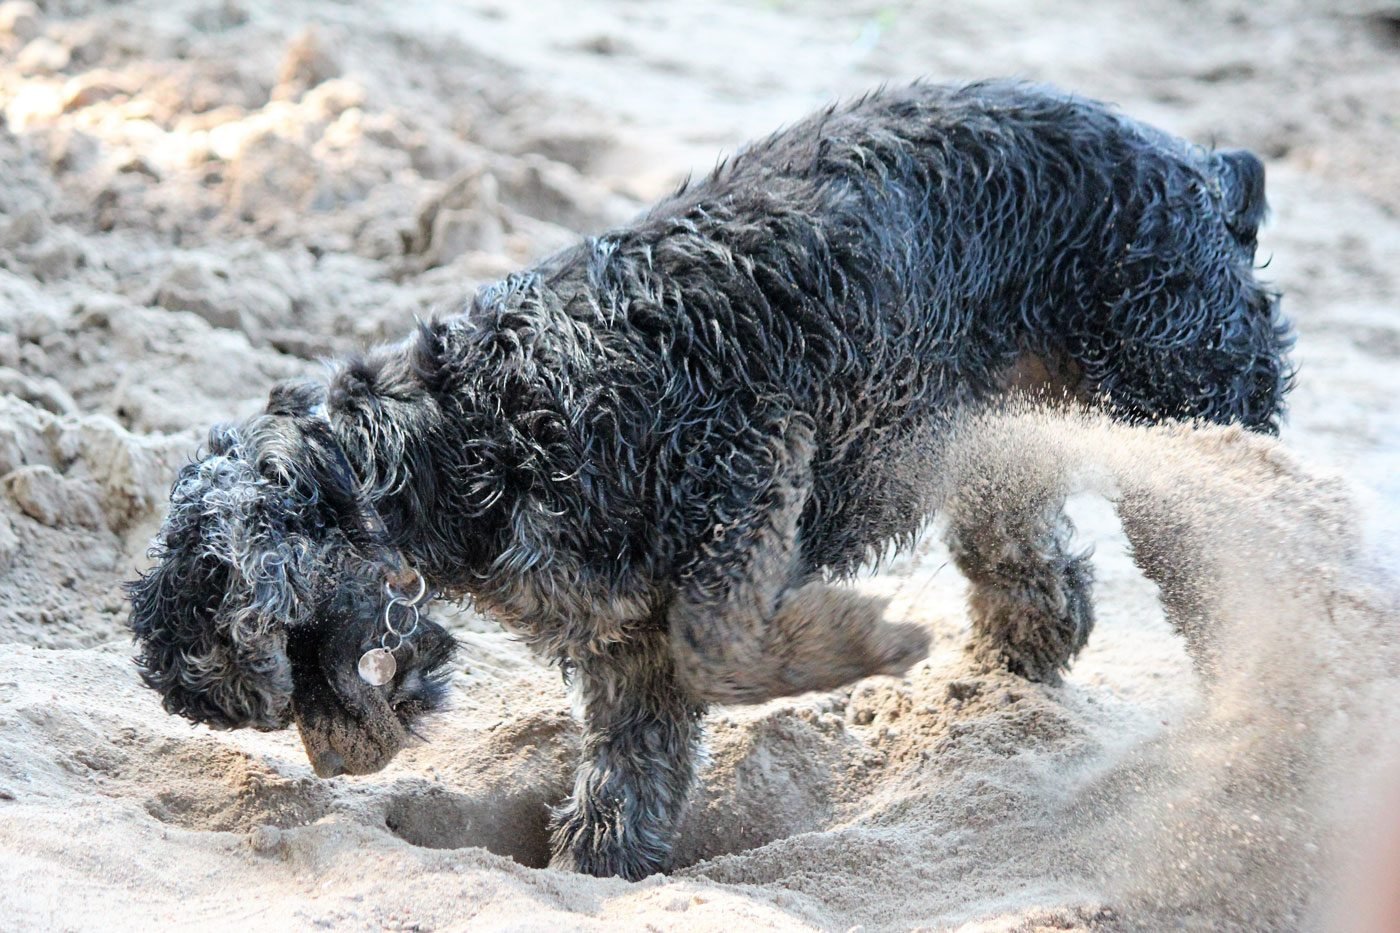 Dog digging in the sand on the beach